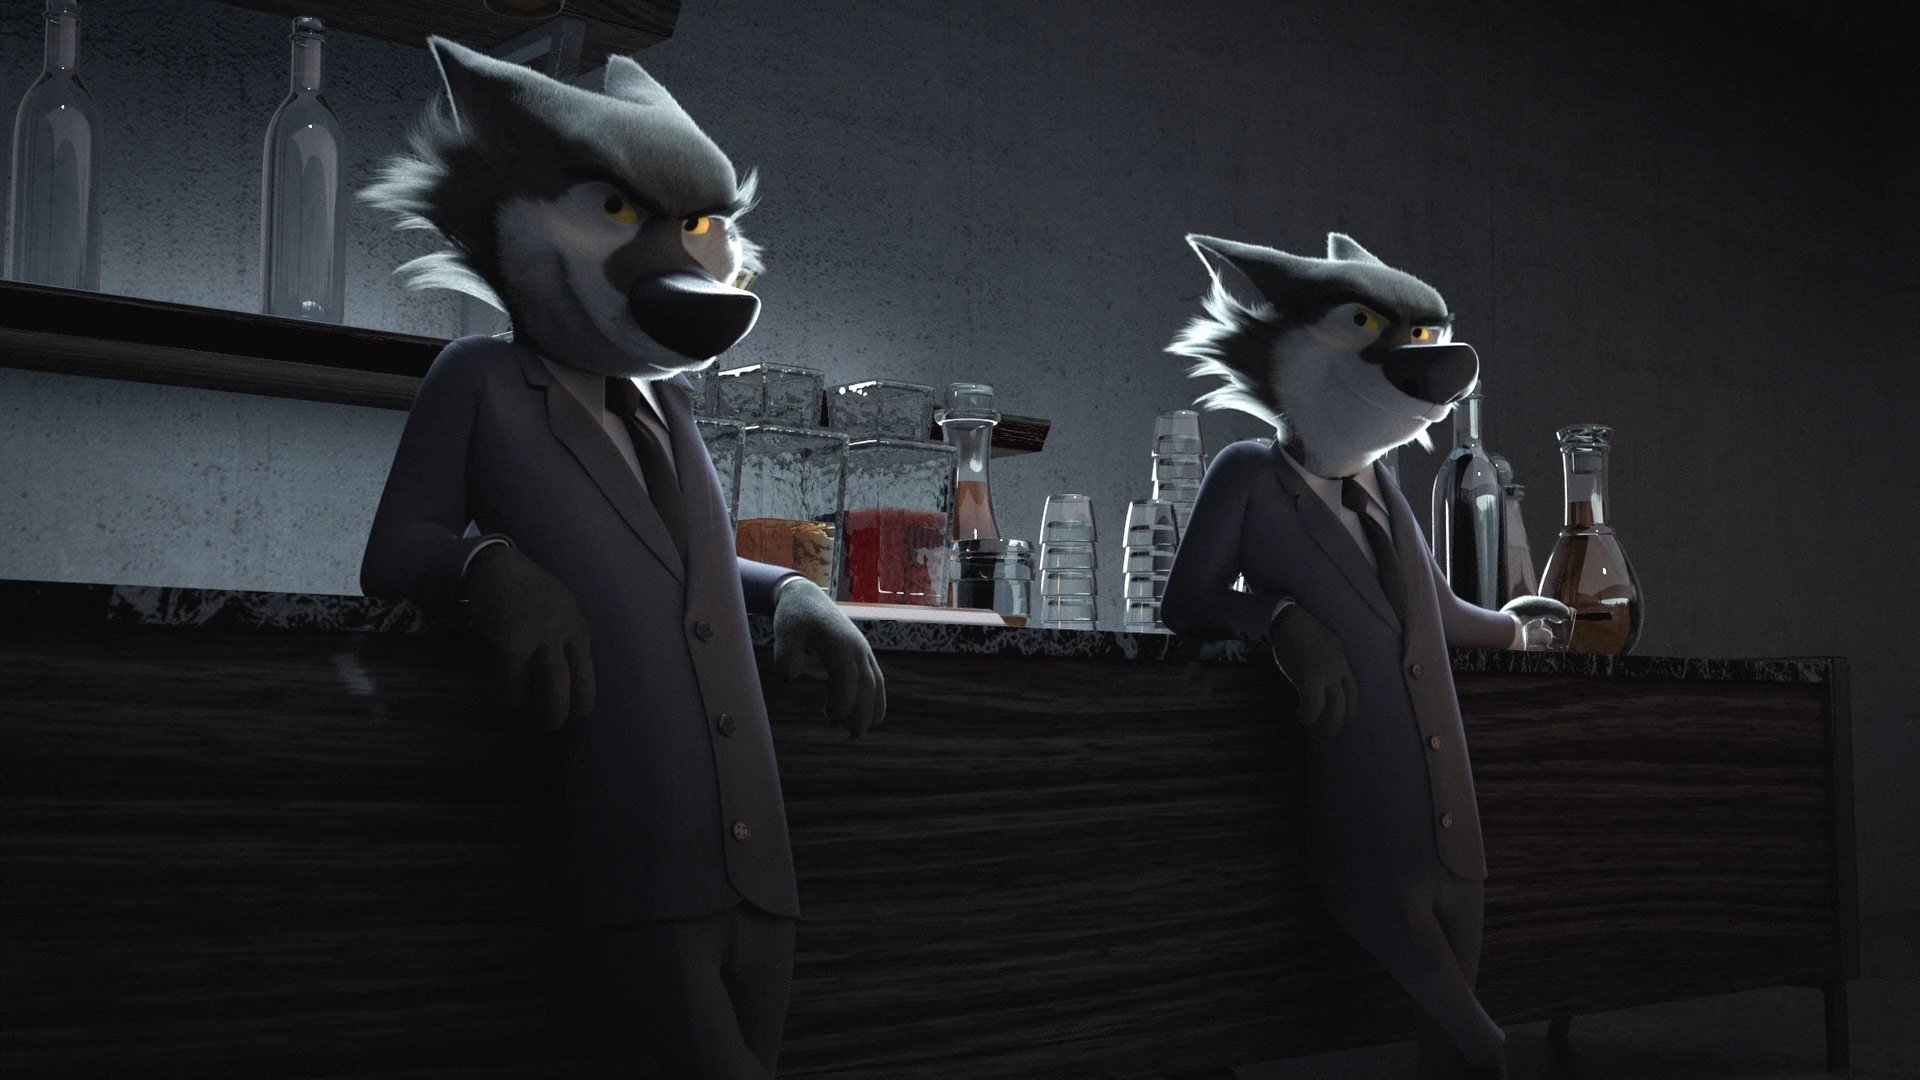 Anthro, Gangsters, Gangster, Wolf, Animals, 3D, Cartoon, Movies, Suits, Clothing, Tie, Screen shot, Screengrab, Rock Dog, Cigars Wallpaper